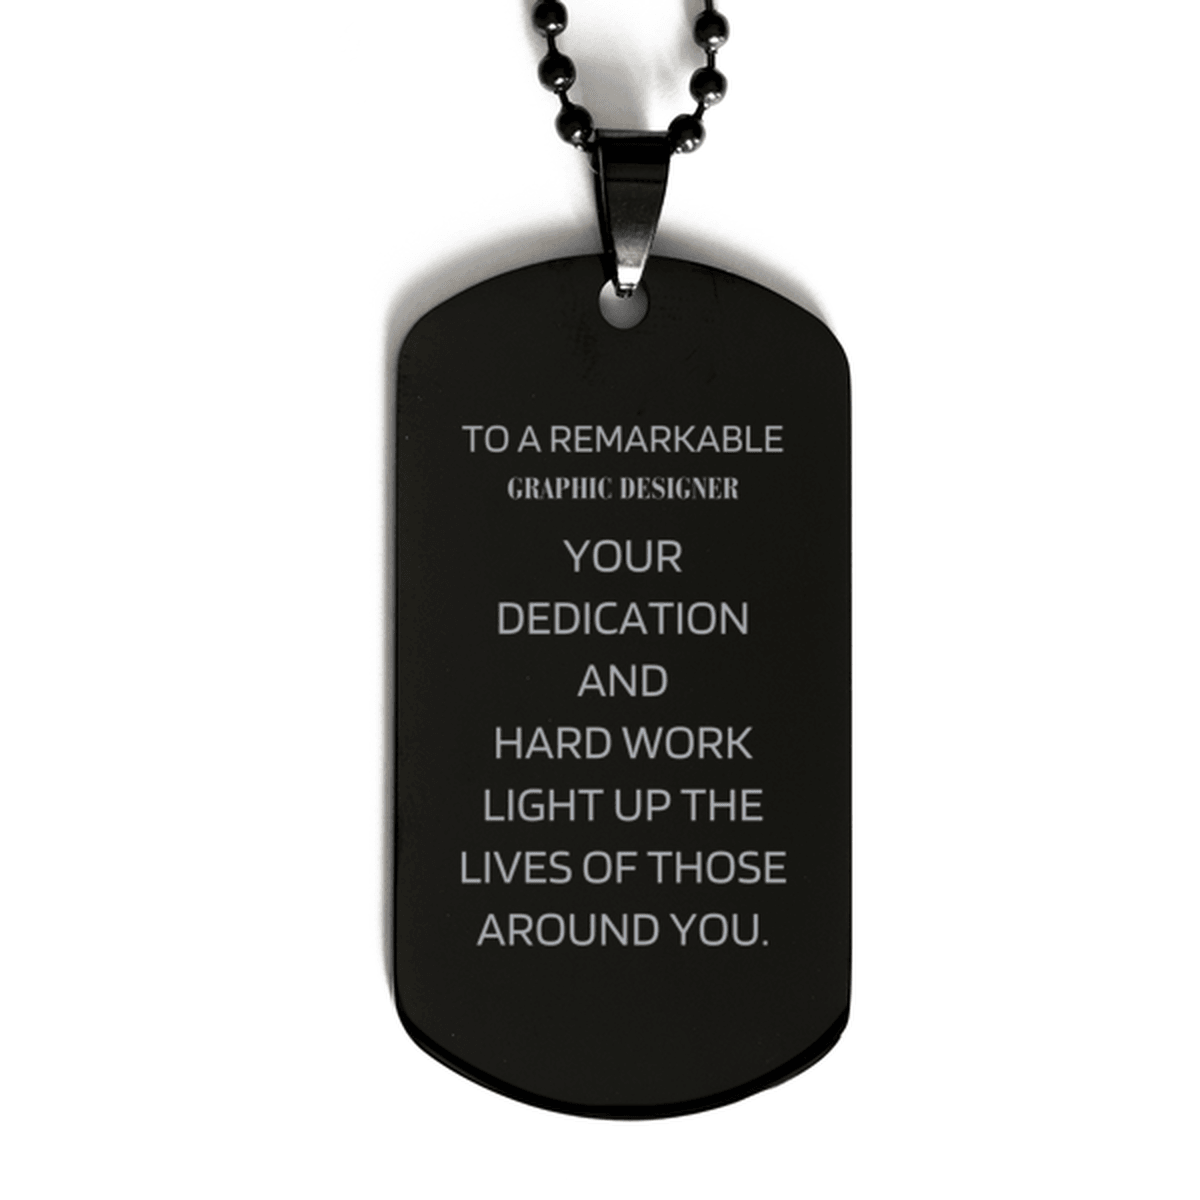 Remarkable Graphic Designer Gifts, Your dedication and hard work, Inspirational Birthday Christmas Unique Black Dog Tag For Graphic Designer, Coworkers, Men, Women, Friends - Mallard Moon Gift Shop